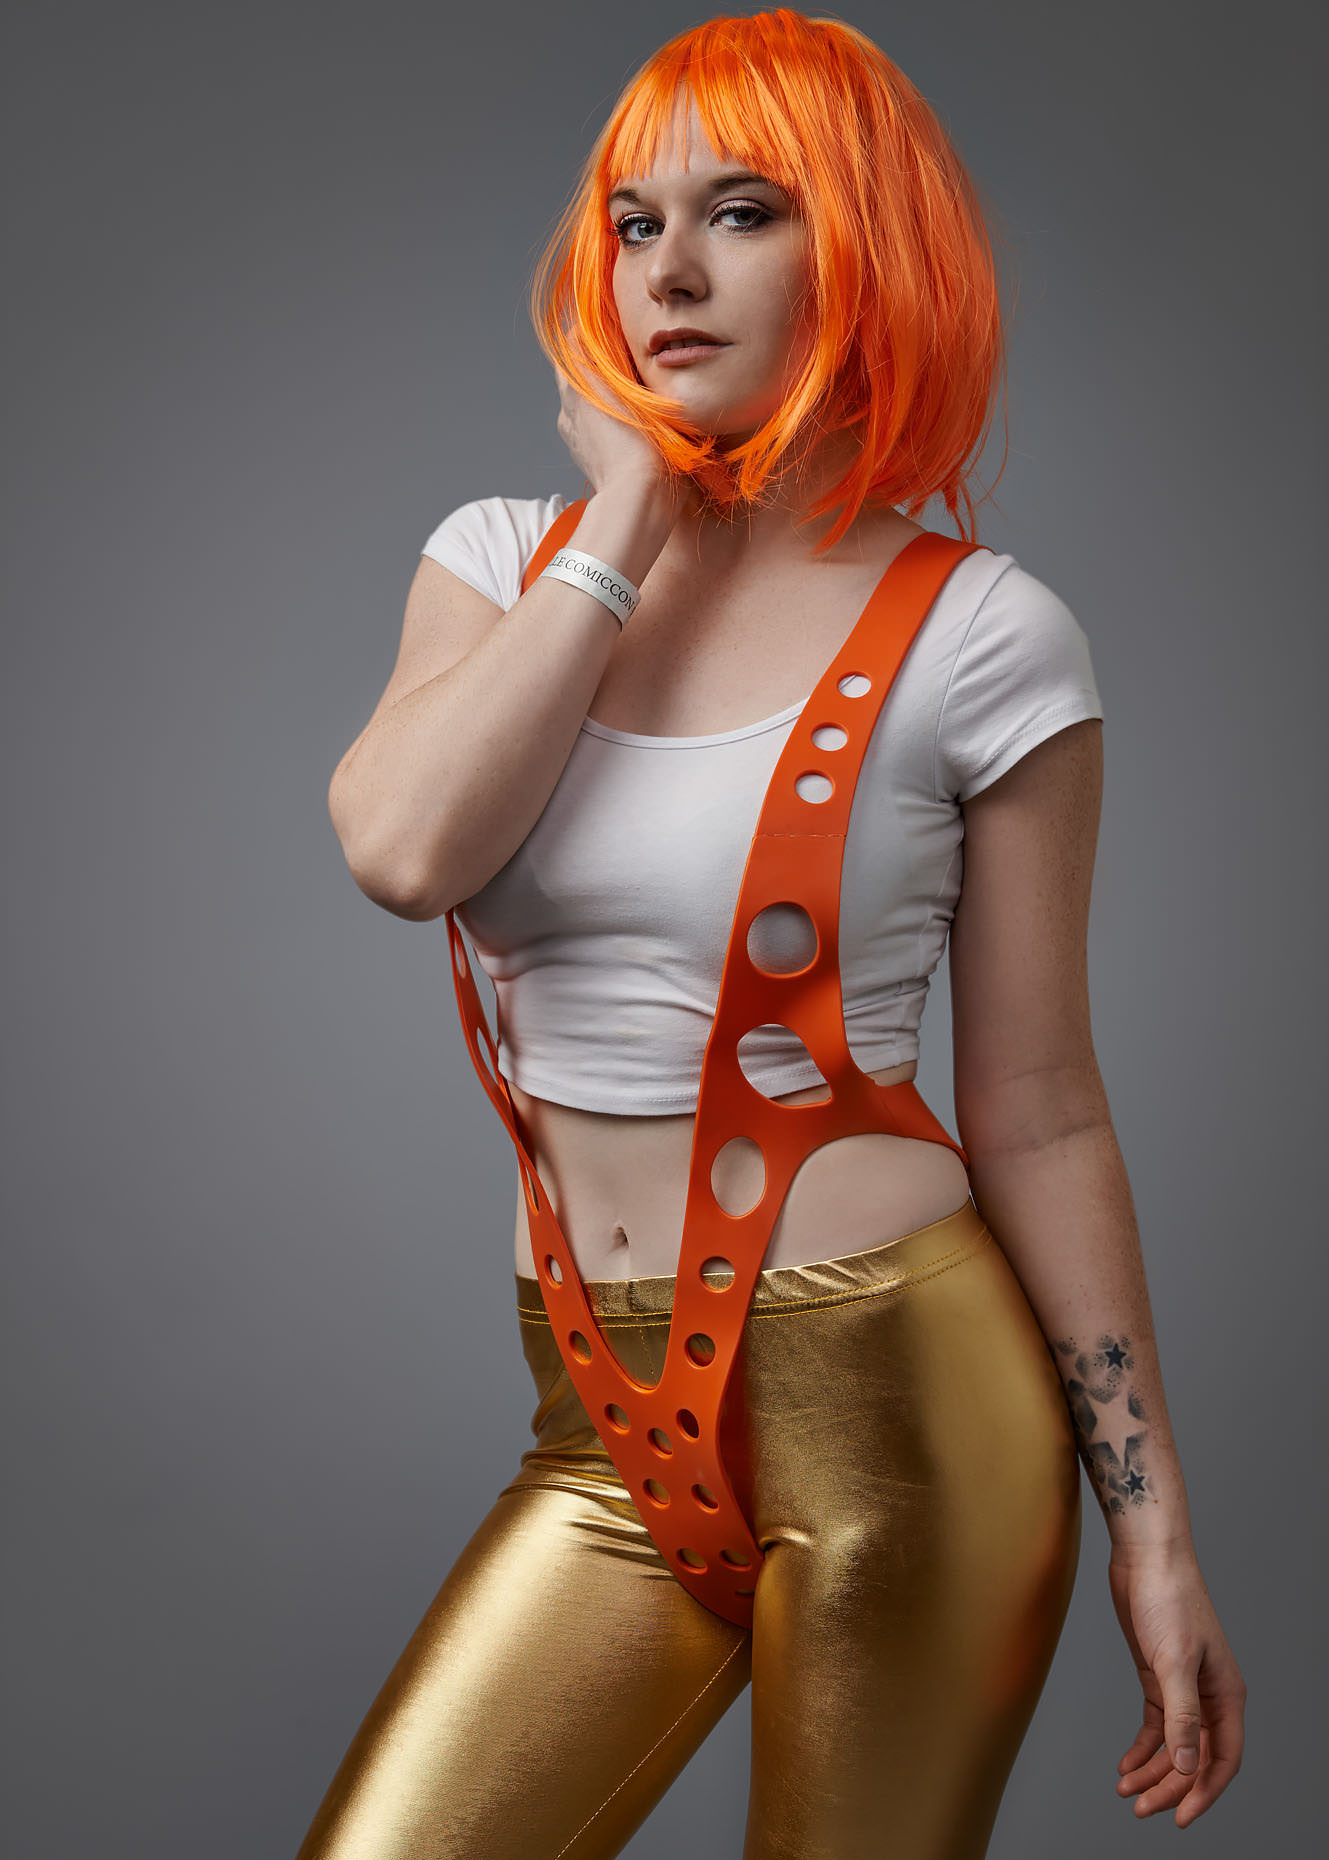 Fifth Element - Leeloo Dallas Multipass